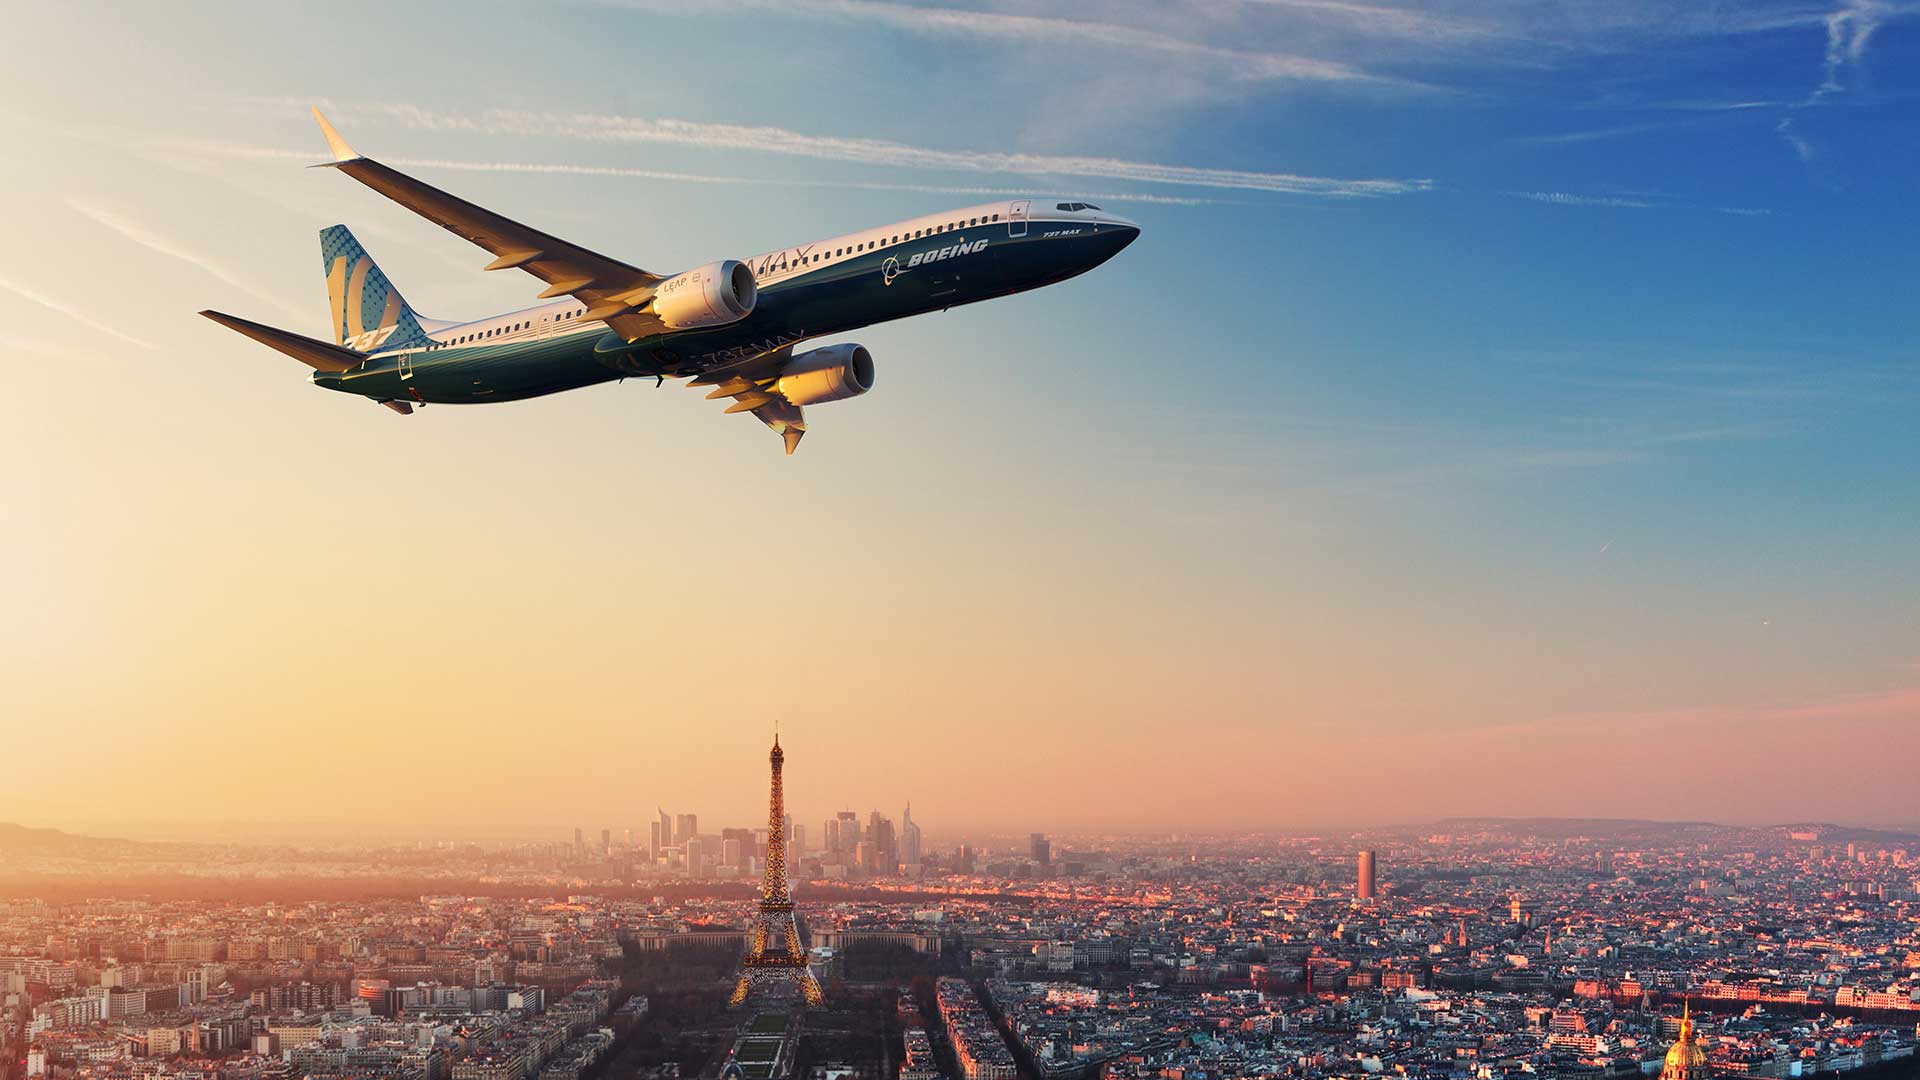 Boeing 737 Max - Boeing 737 Max Paris , HD Wallpaper & Backgrounds